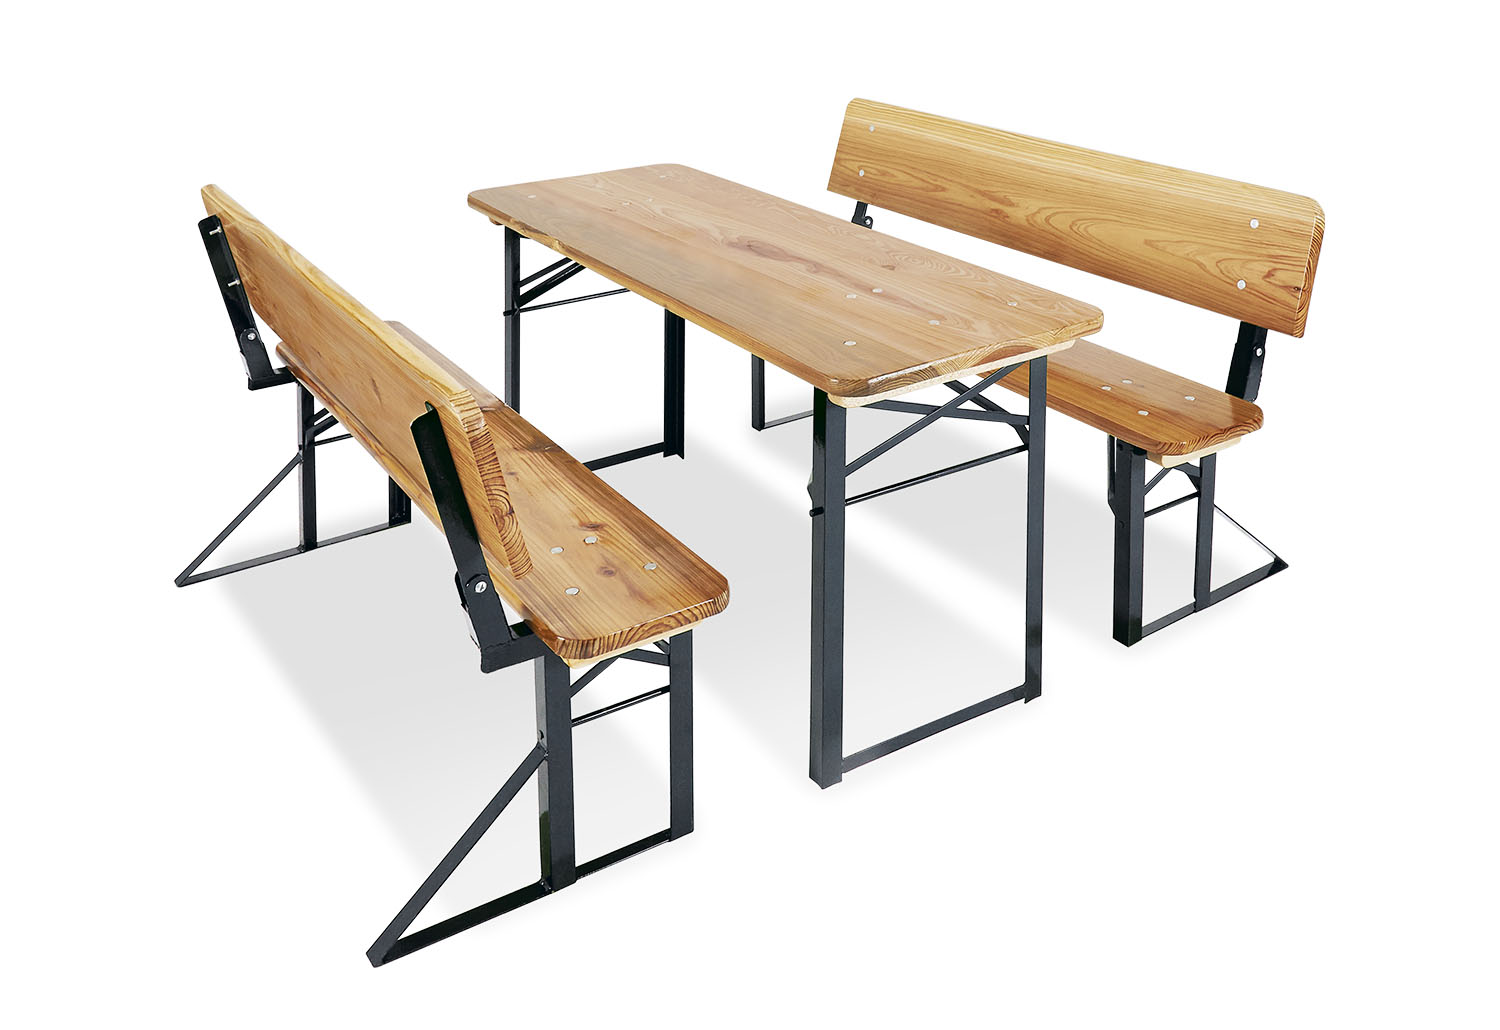 Children's bench and table set for outdoor festivities 'Sepp mit Lehne', 3 parts